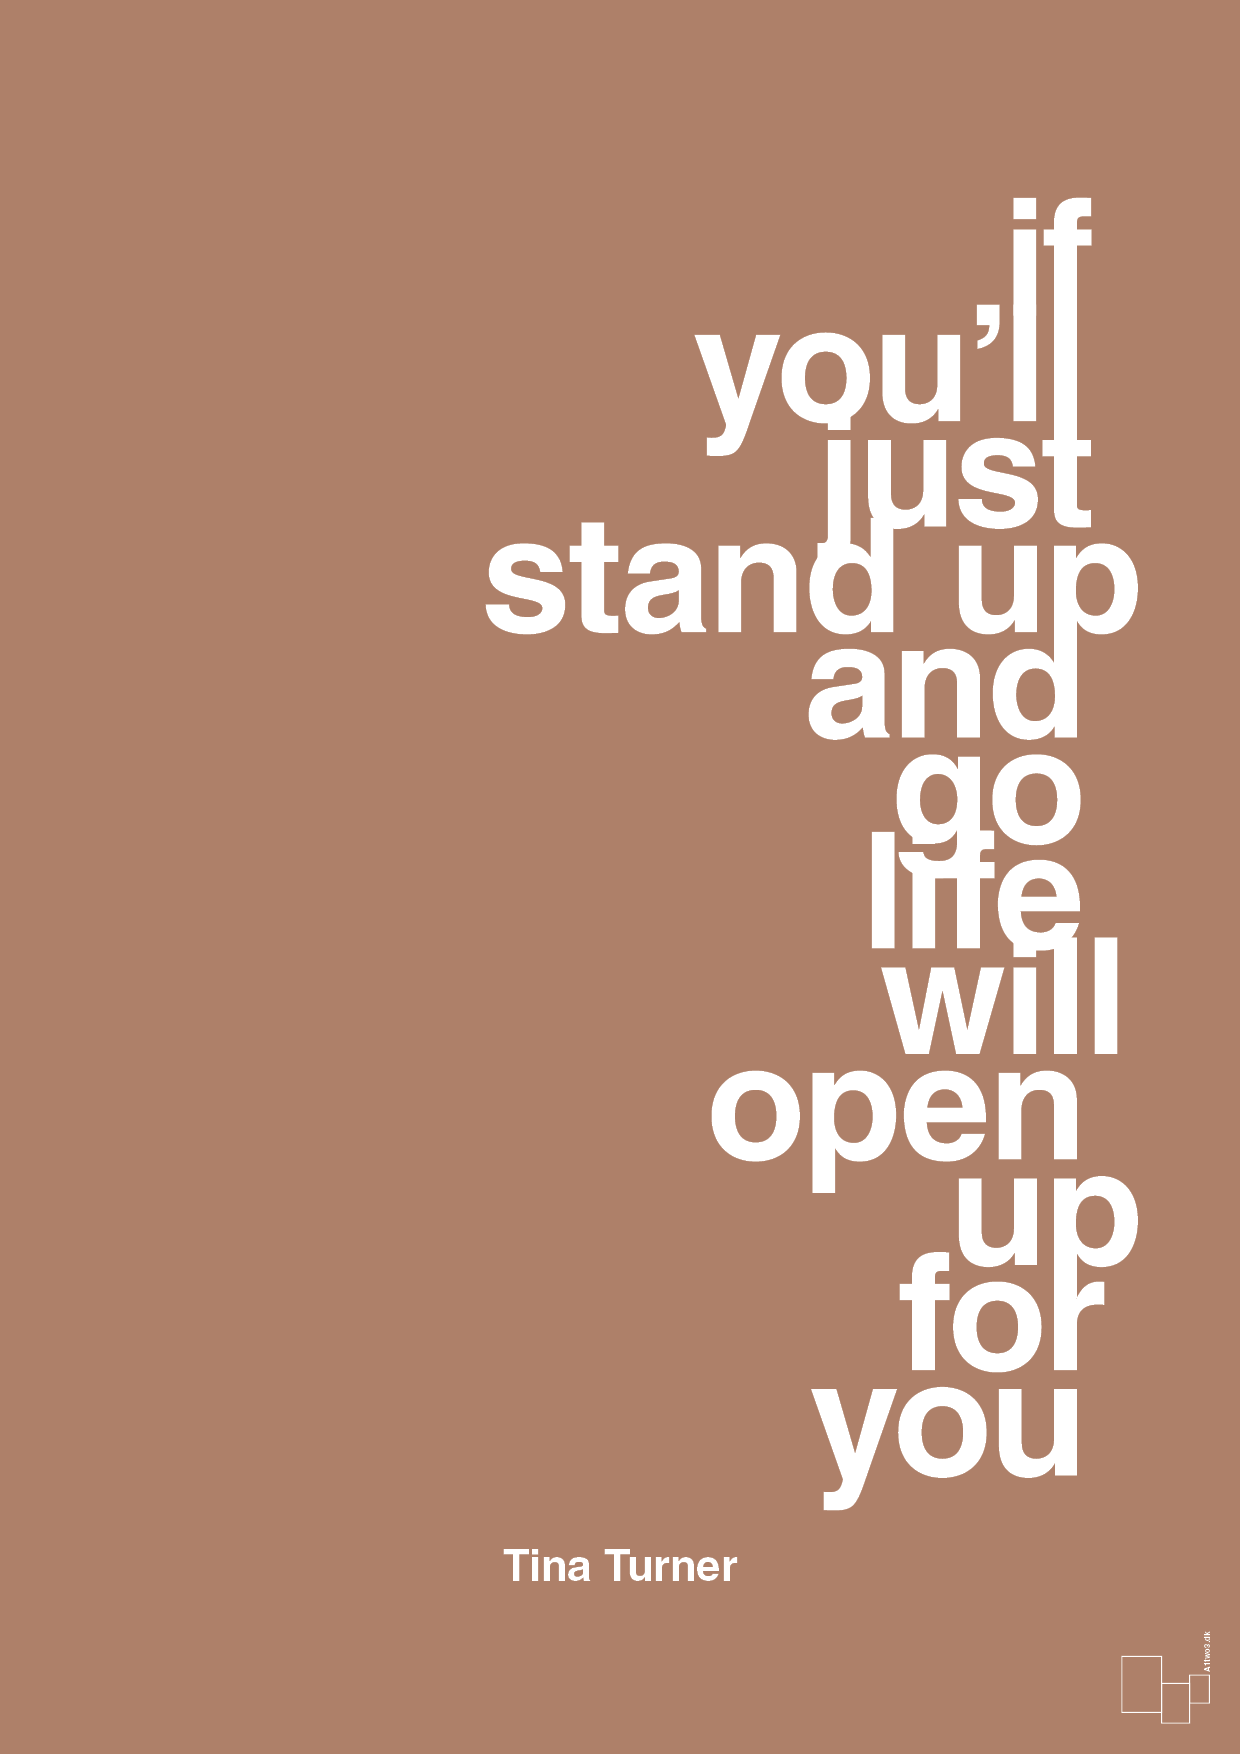 if you’ll just stand up and go life will open up for you - Plakat med Citater i Cider Spice